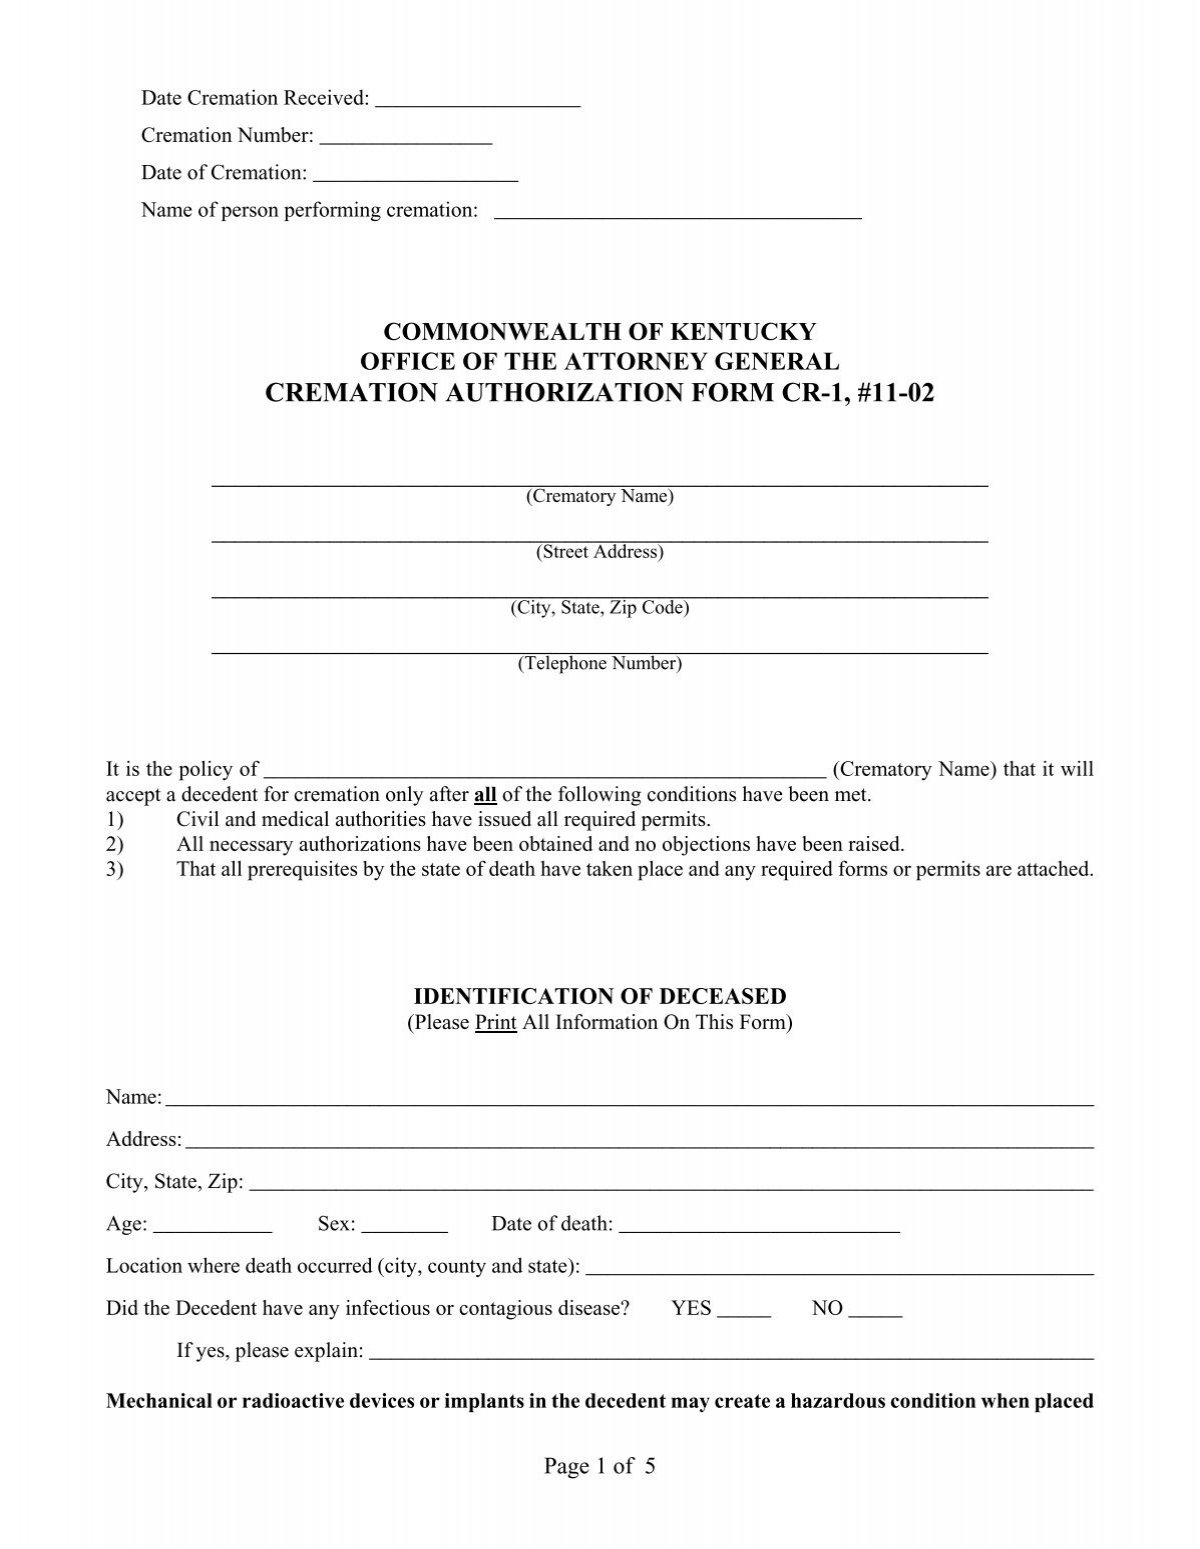 cremation-authorization-form-cr-1-grissom-martin-funeral-home